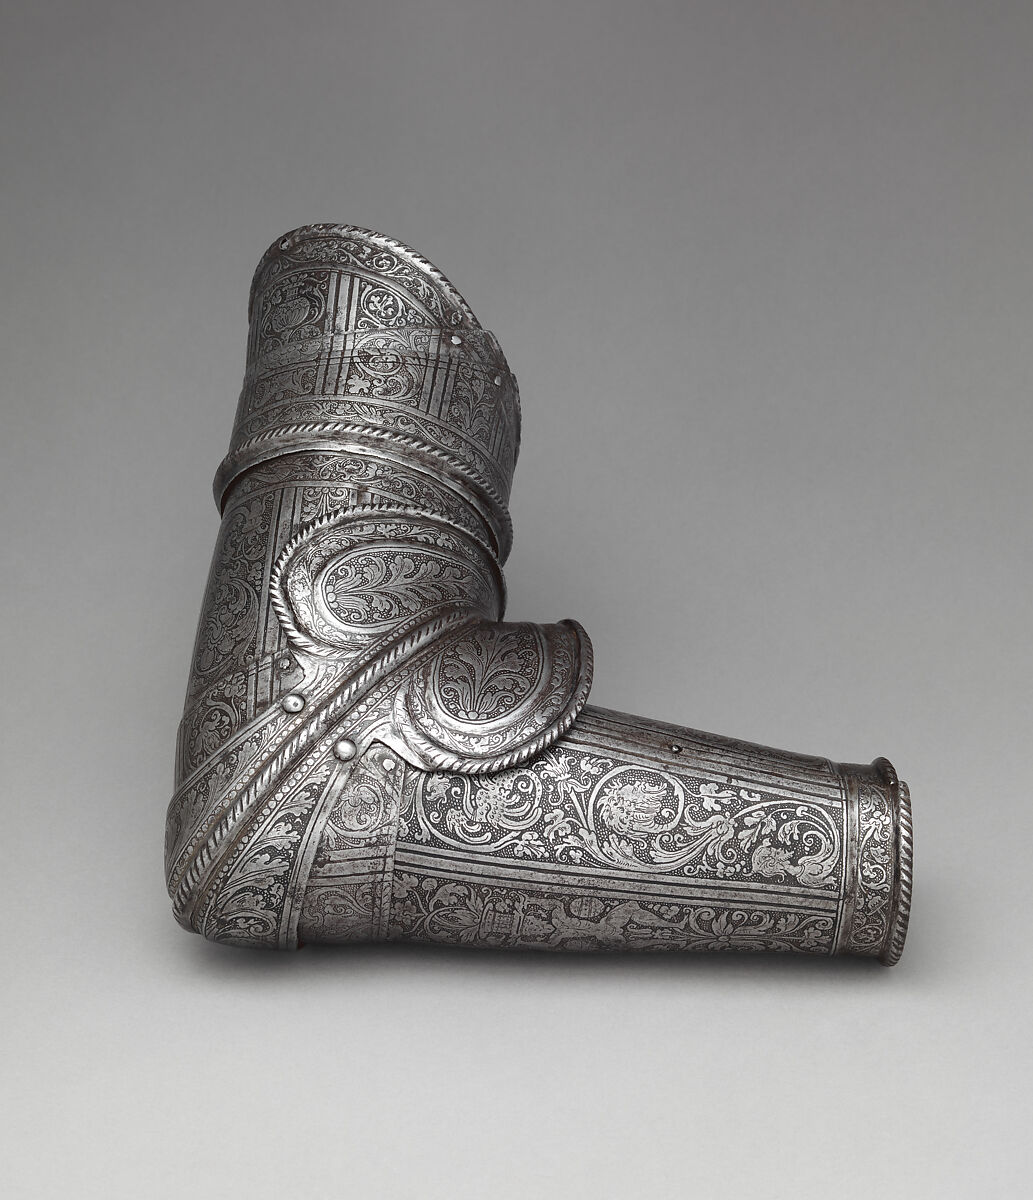 Right Vambrace (Arm Defense) from an armor probably made for Count Antonio IV Colalto (1548–1620), Steel, Italian, probably Brescia 